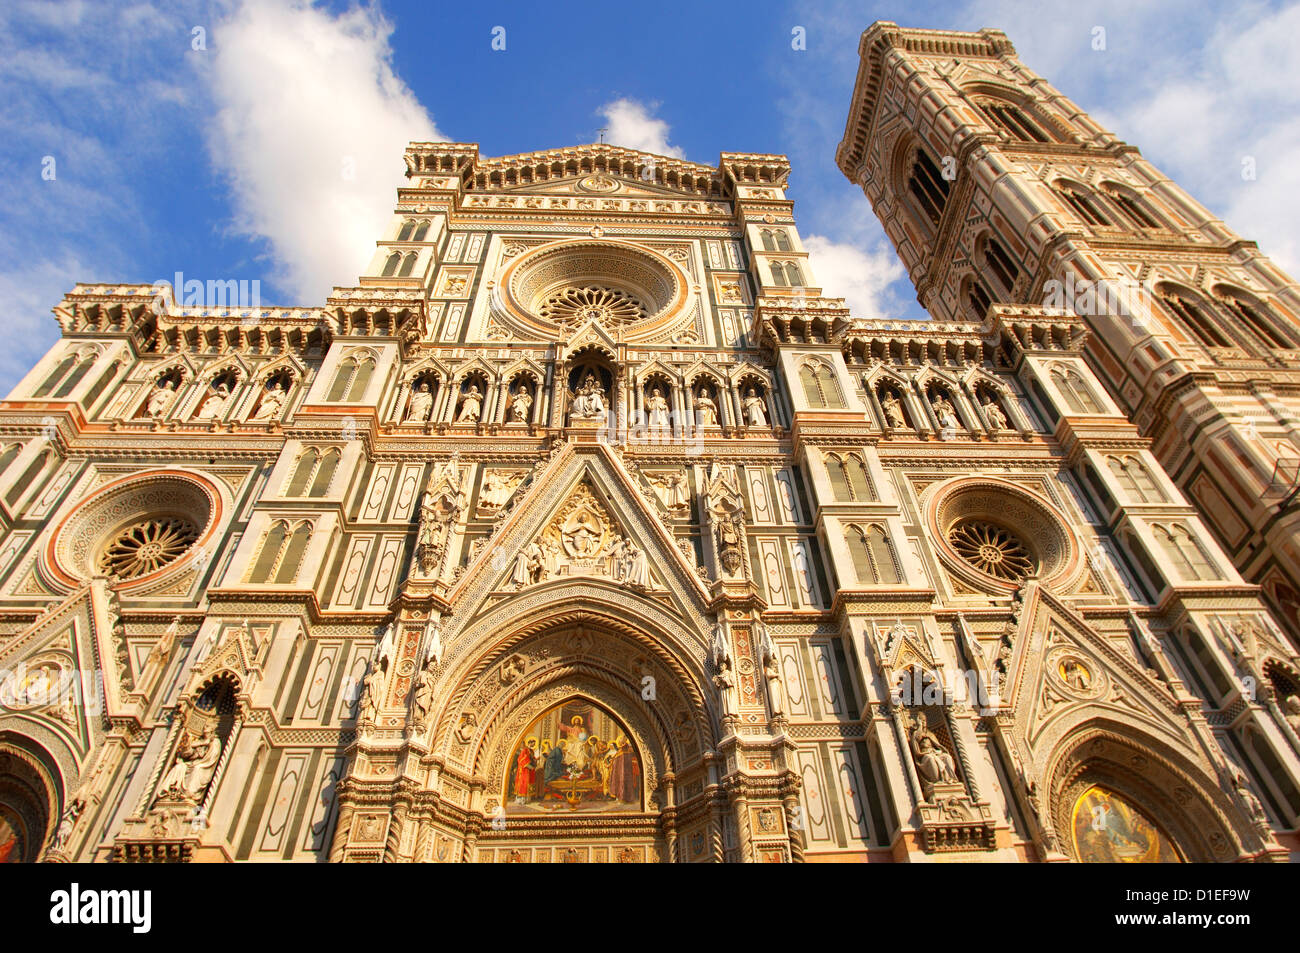 The Dome Cathederal - Detail Of facade and bell tower ; Florence Italy Stock Photo